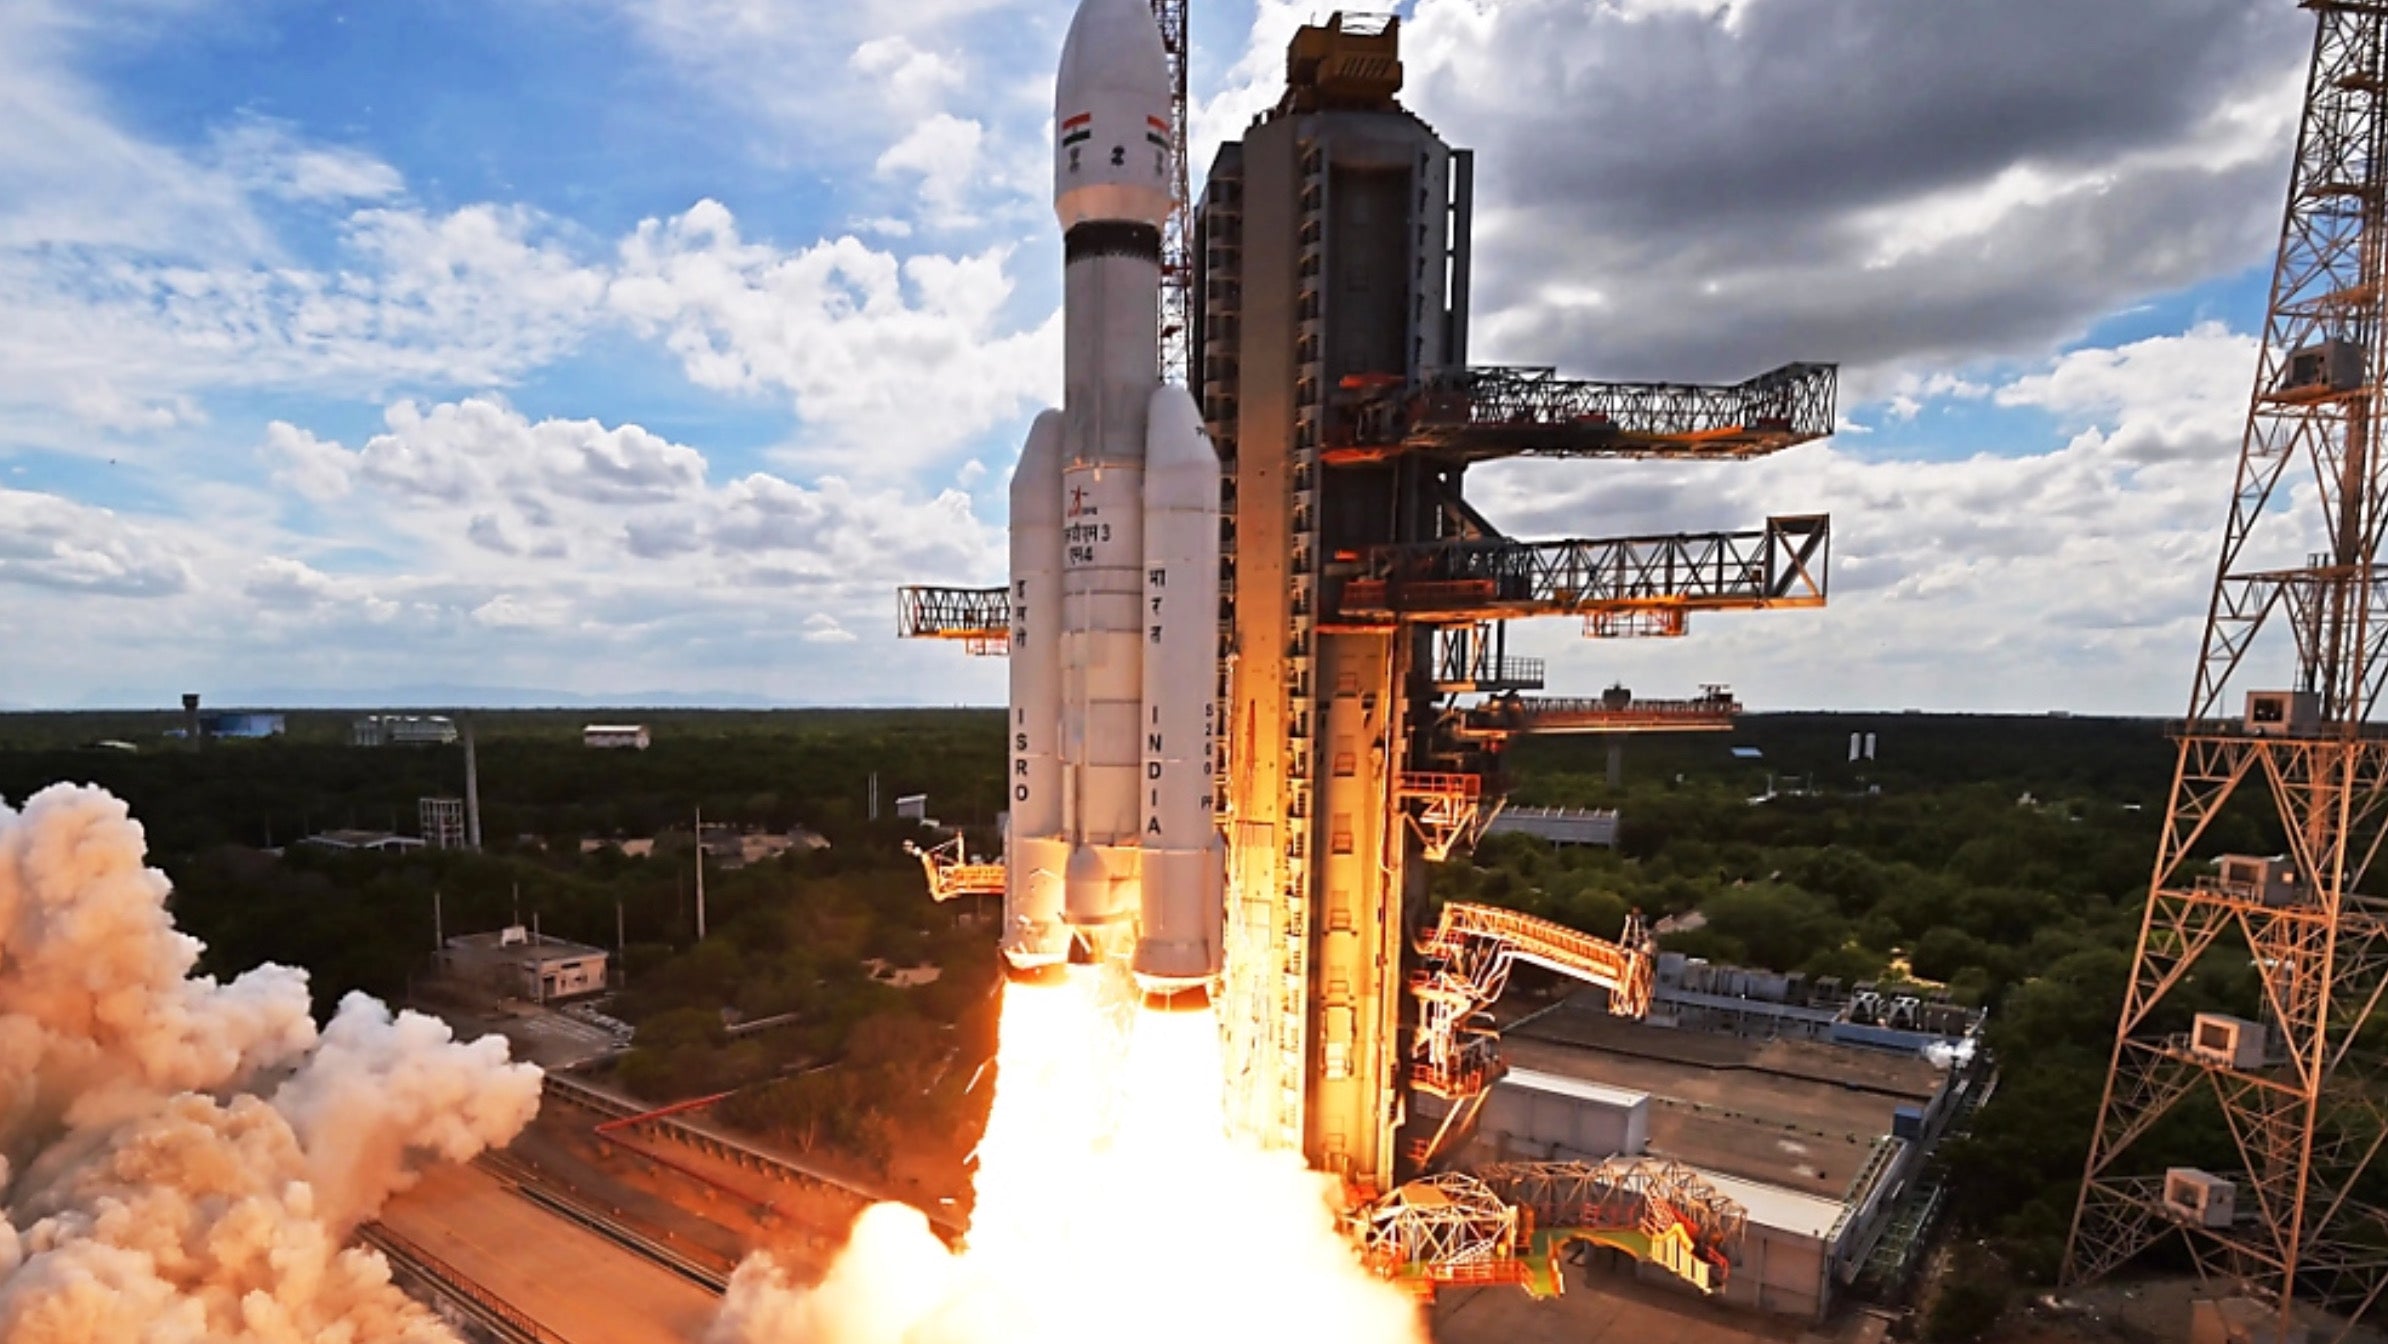 Successful orbit entry for India’s Chandrayaan-3 lunar mission, Magnate Daily